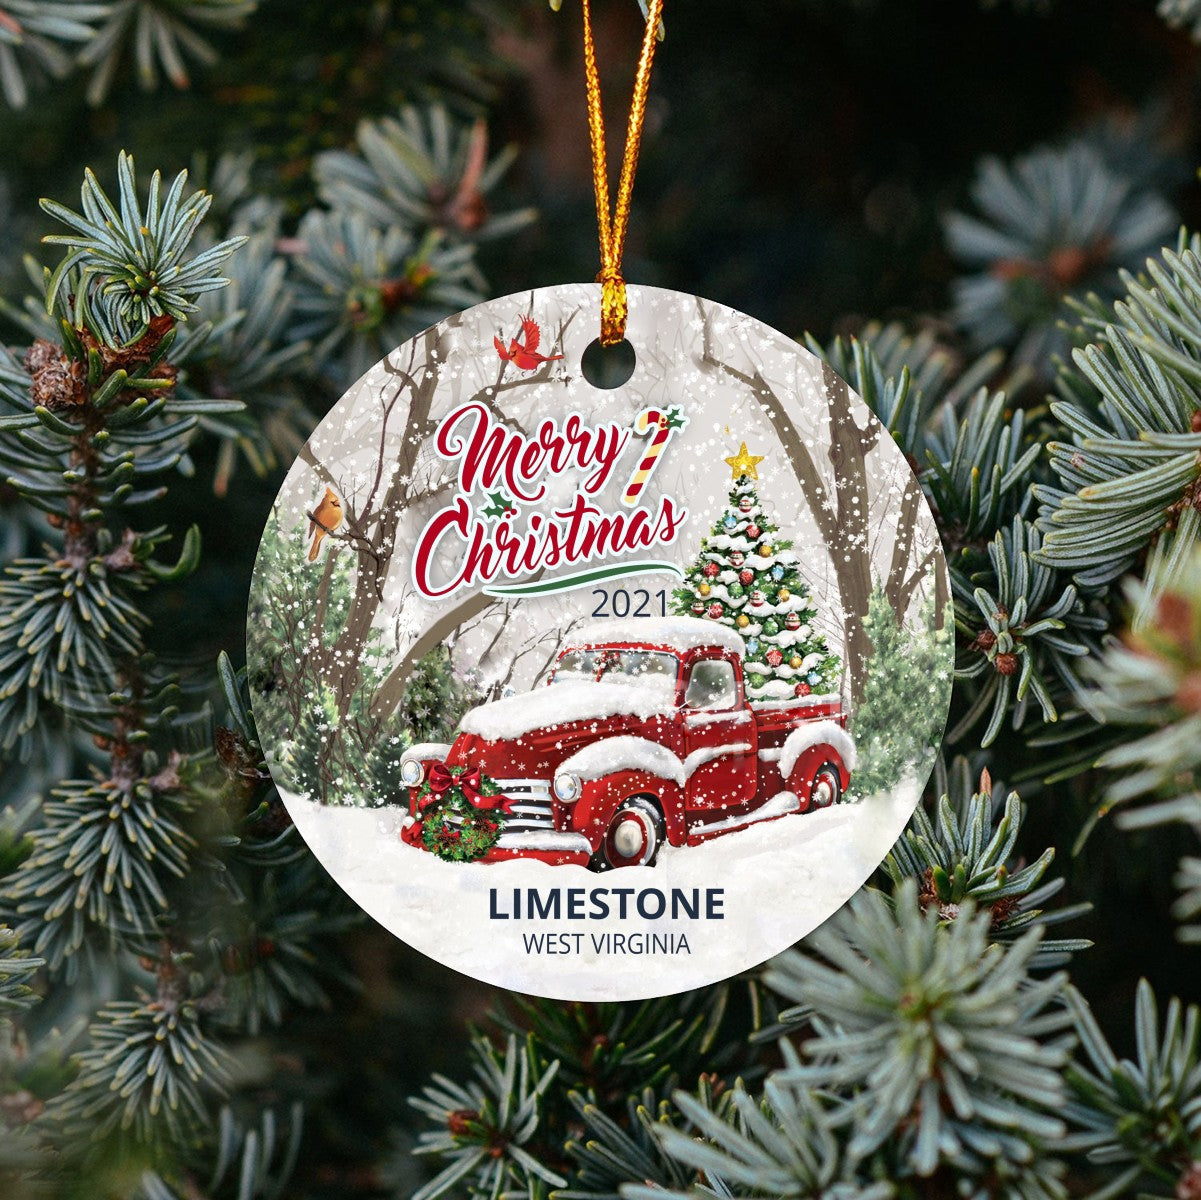 Christmas Tree Ornaments Limestone - Ornament Customize With Name City And State Limestone West Virginia WV - Red Truck Xmas Ornaments 3'' Plastic Gift For Family, Friend And Housewarming